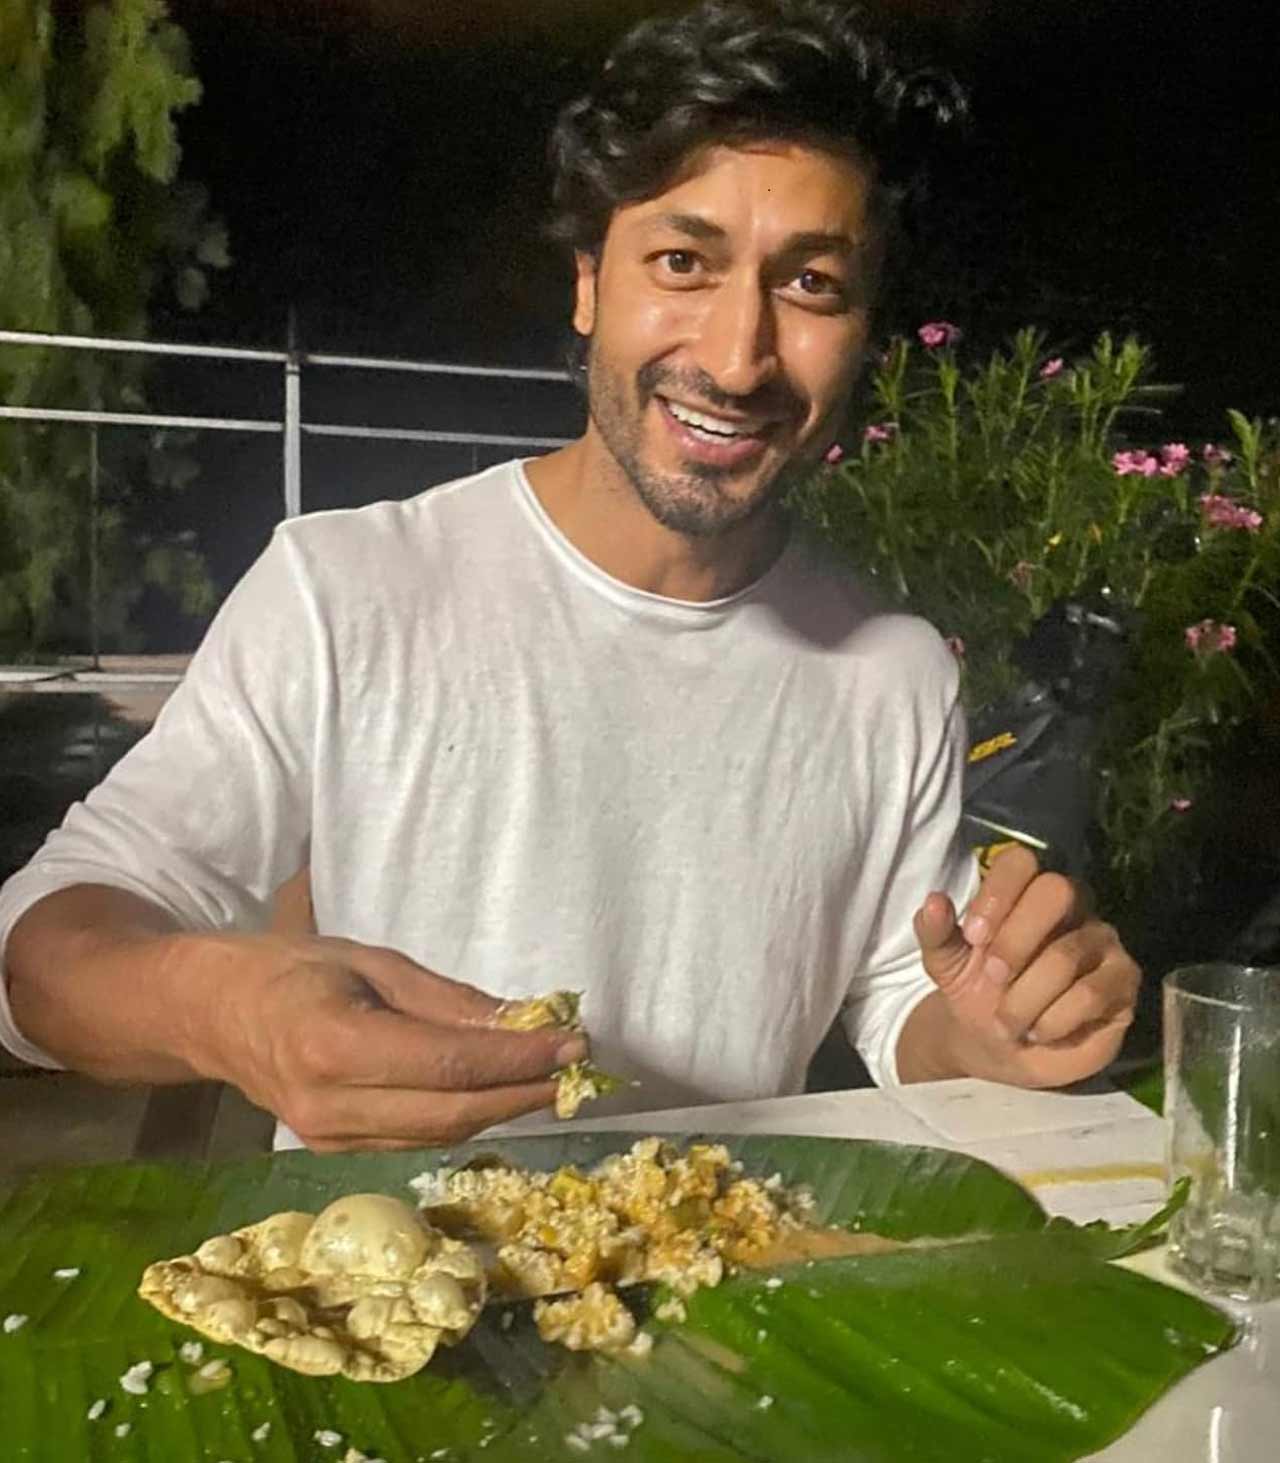 Vidyut Jammwal: He turned vegetarian almost two decades ago. The actor, who has a body to die for, says, 